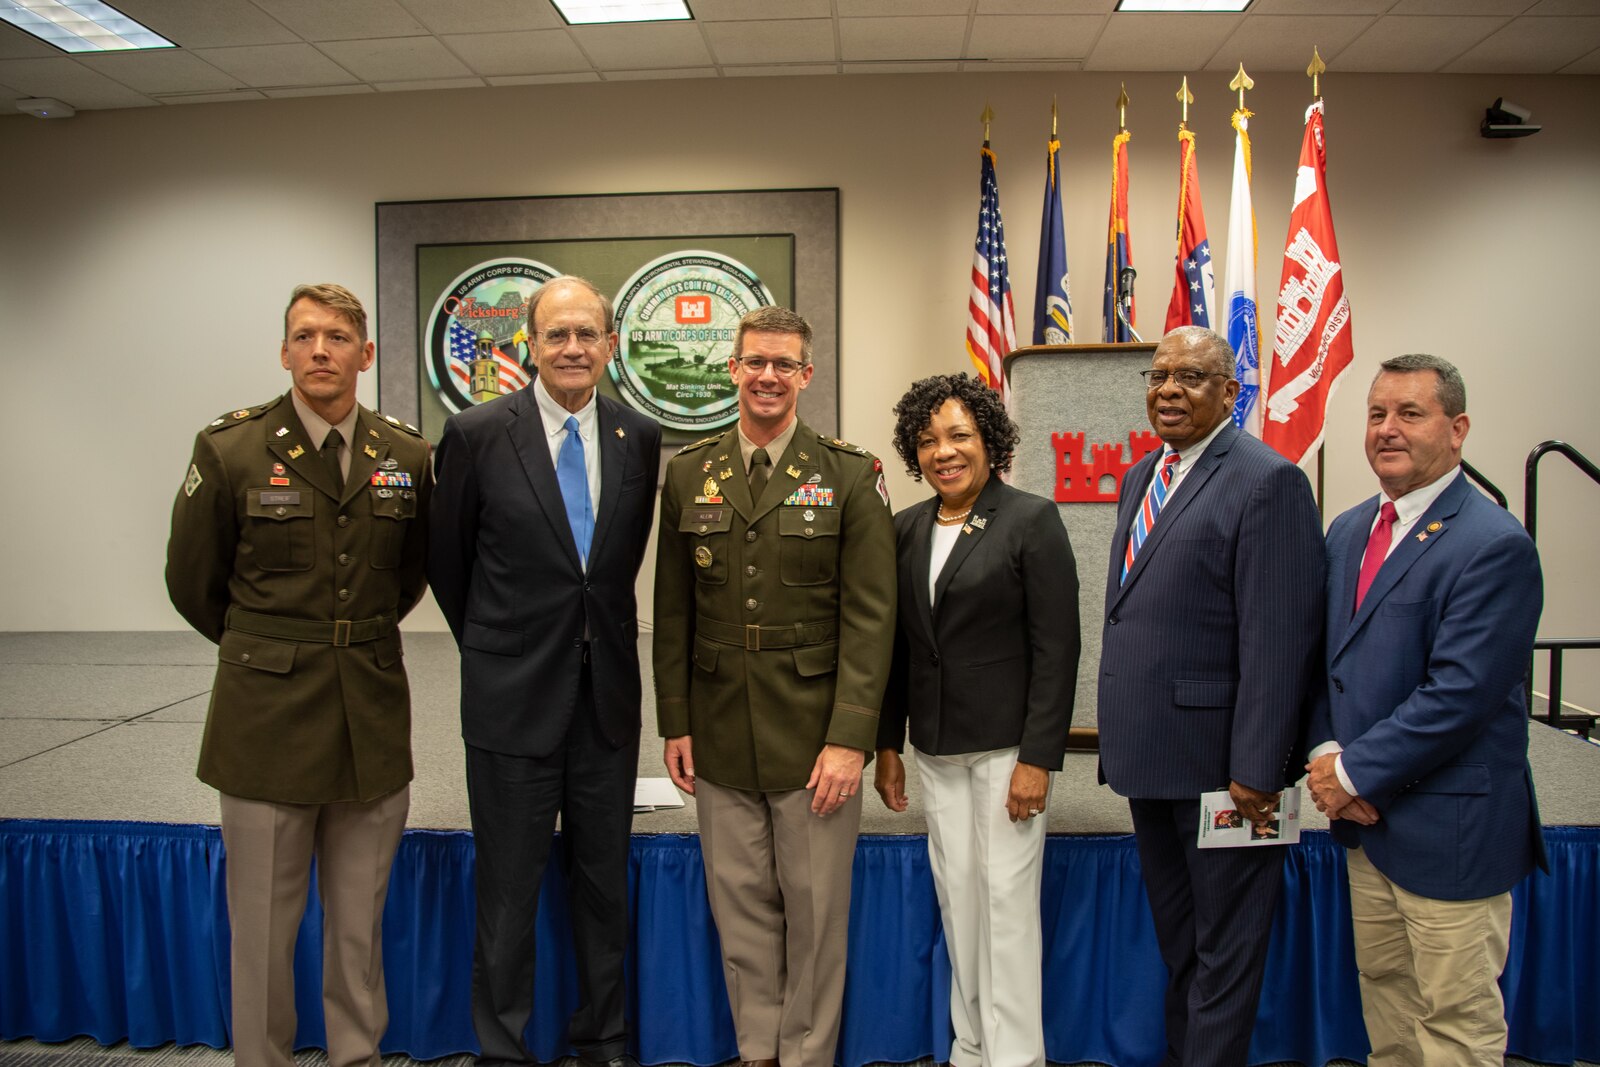 VICKSBURG, Miss.-- The U.S. Army Corps of Engineers (USACE) Vicksburg District recognized 150 years of service to the nation with a formal celebration at district headquarters last Wednesday.